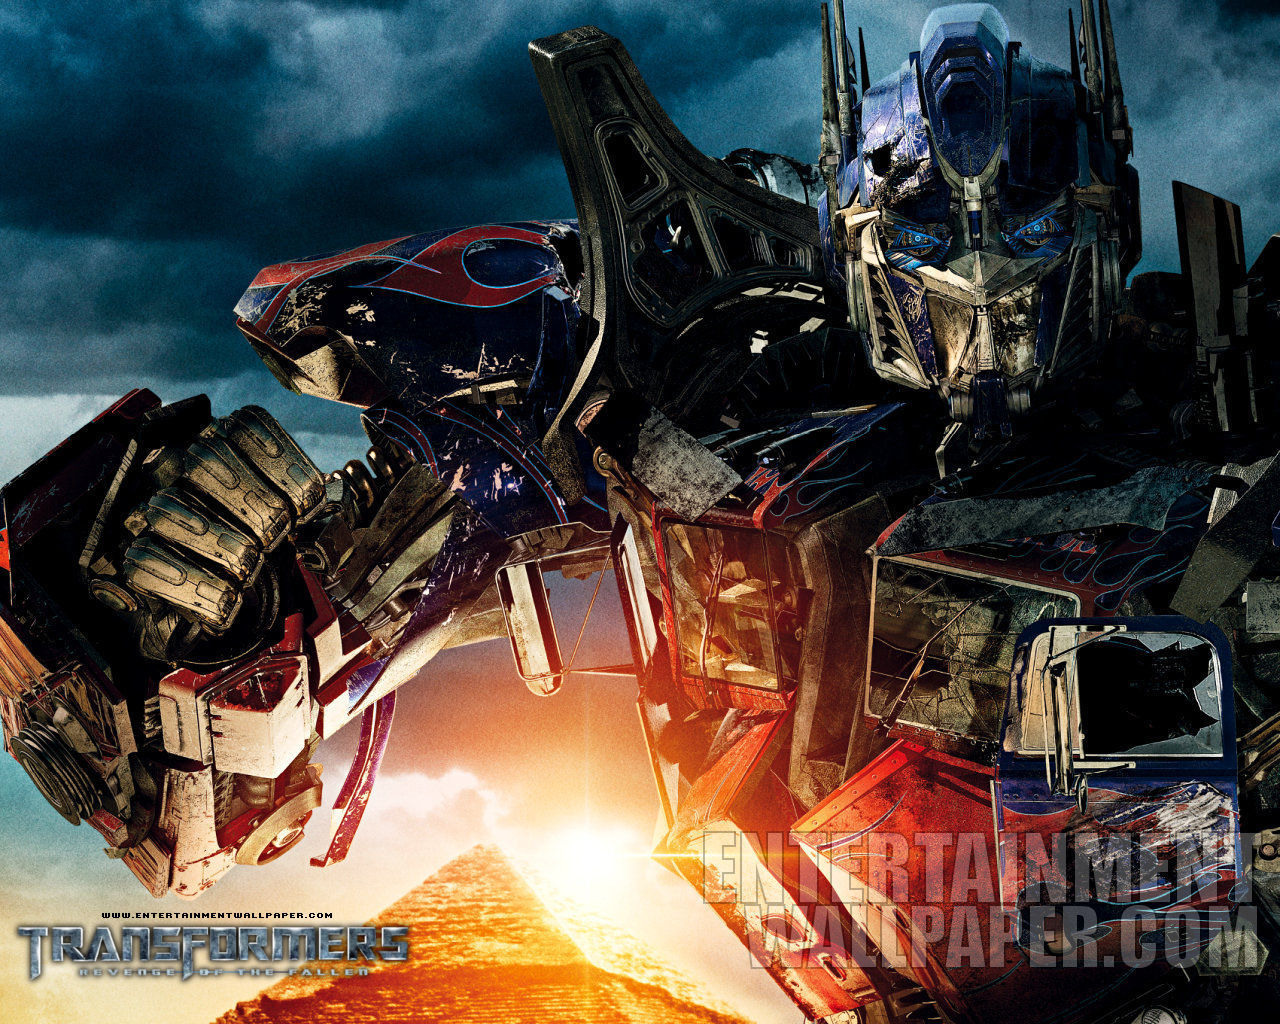 transformers rise of the fallen full movie